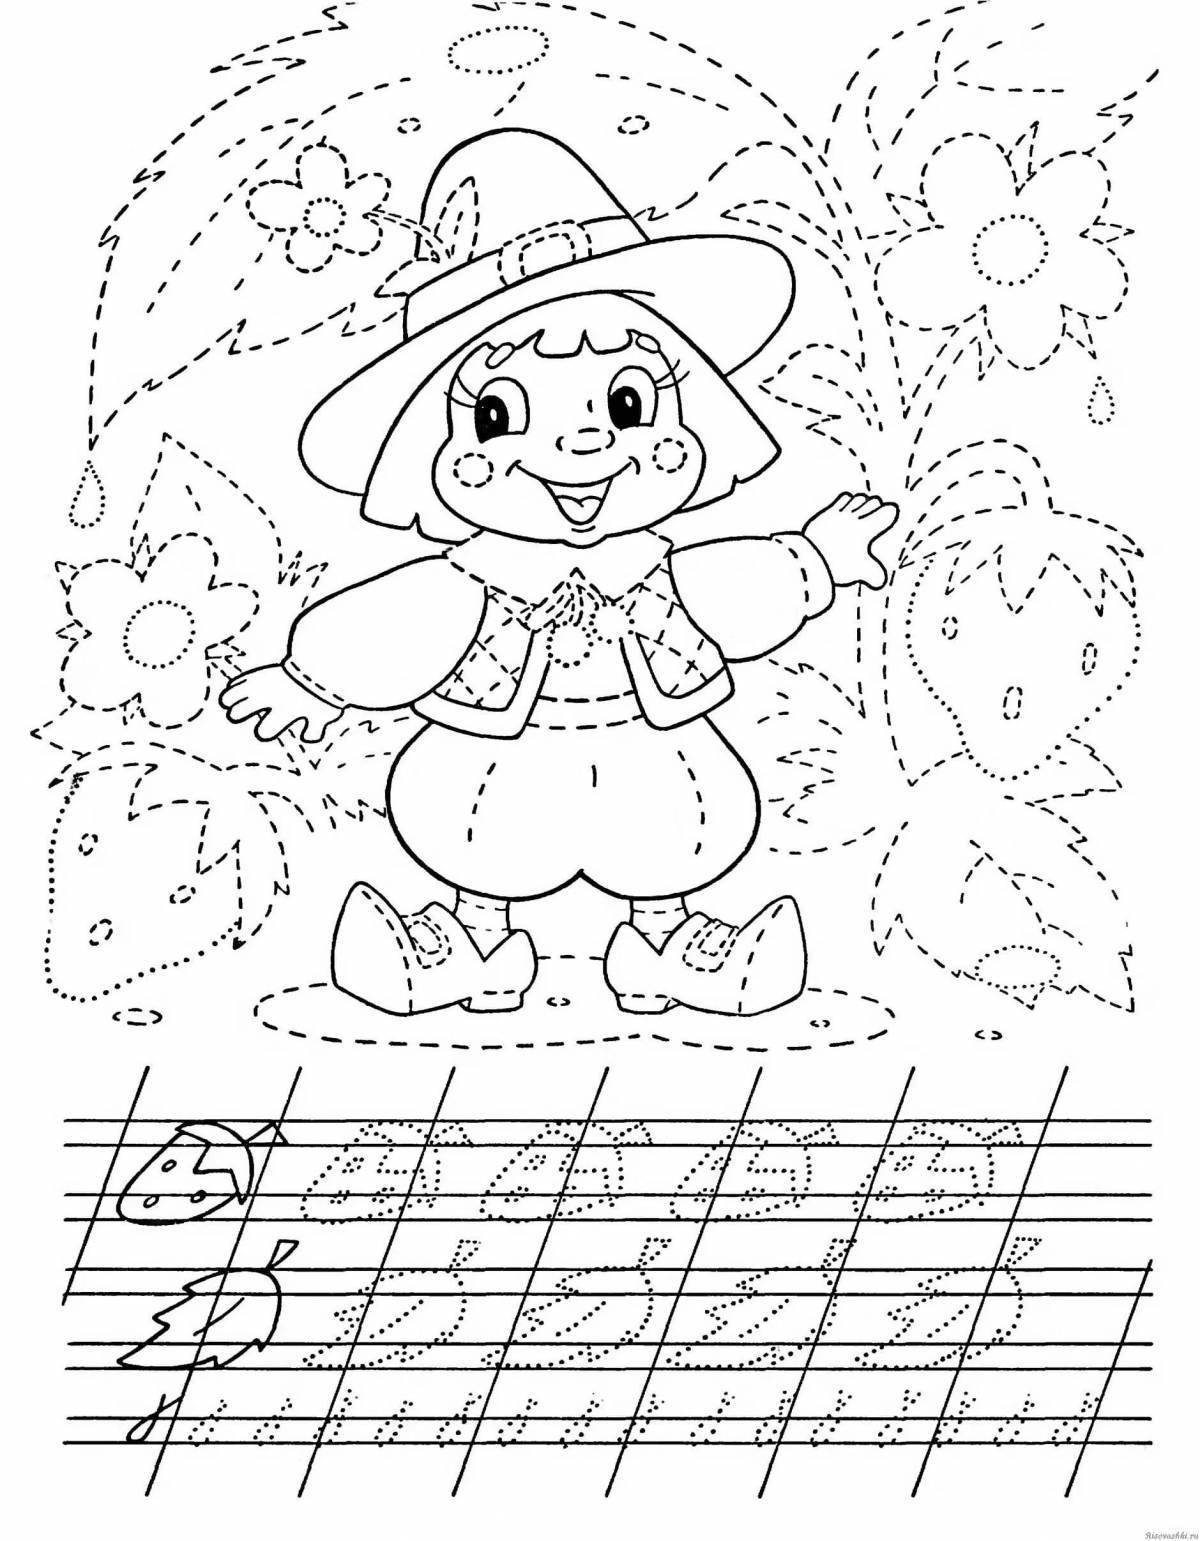 Color-bright prescription coloring page for children 4-5 years old